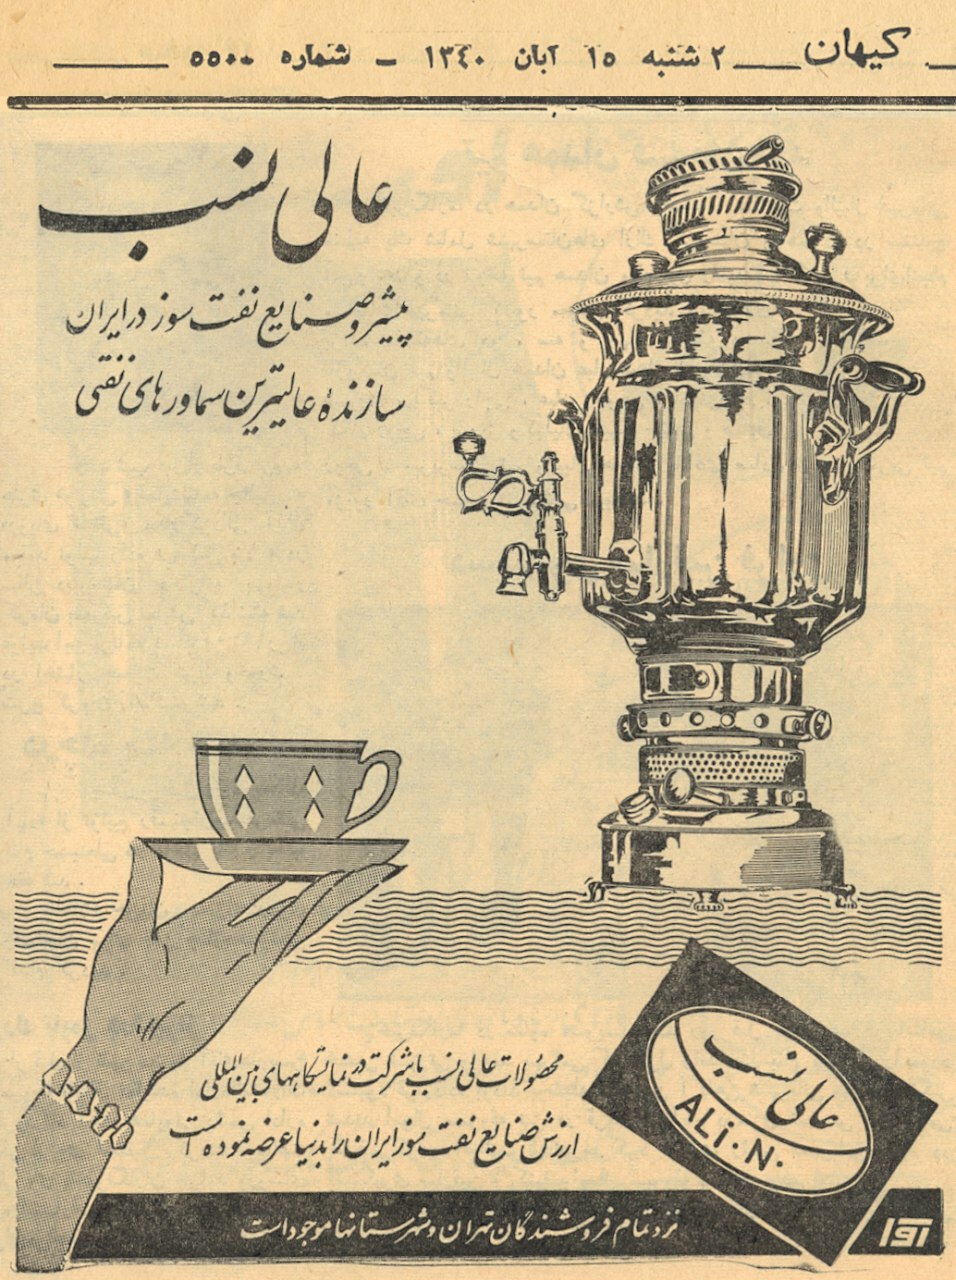 Advertising Alinassab co's products in the past